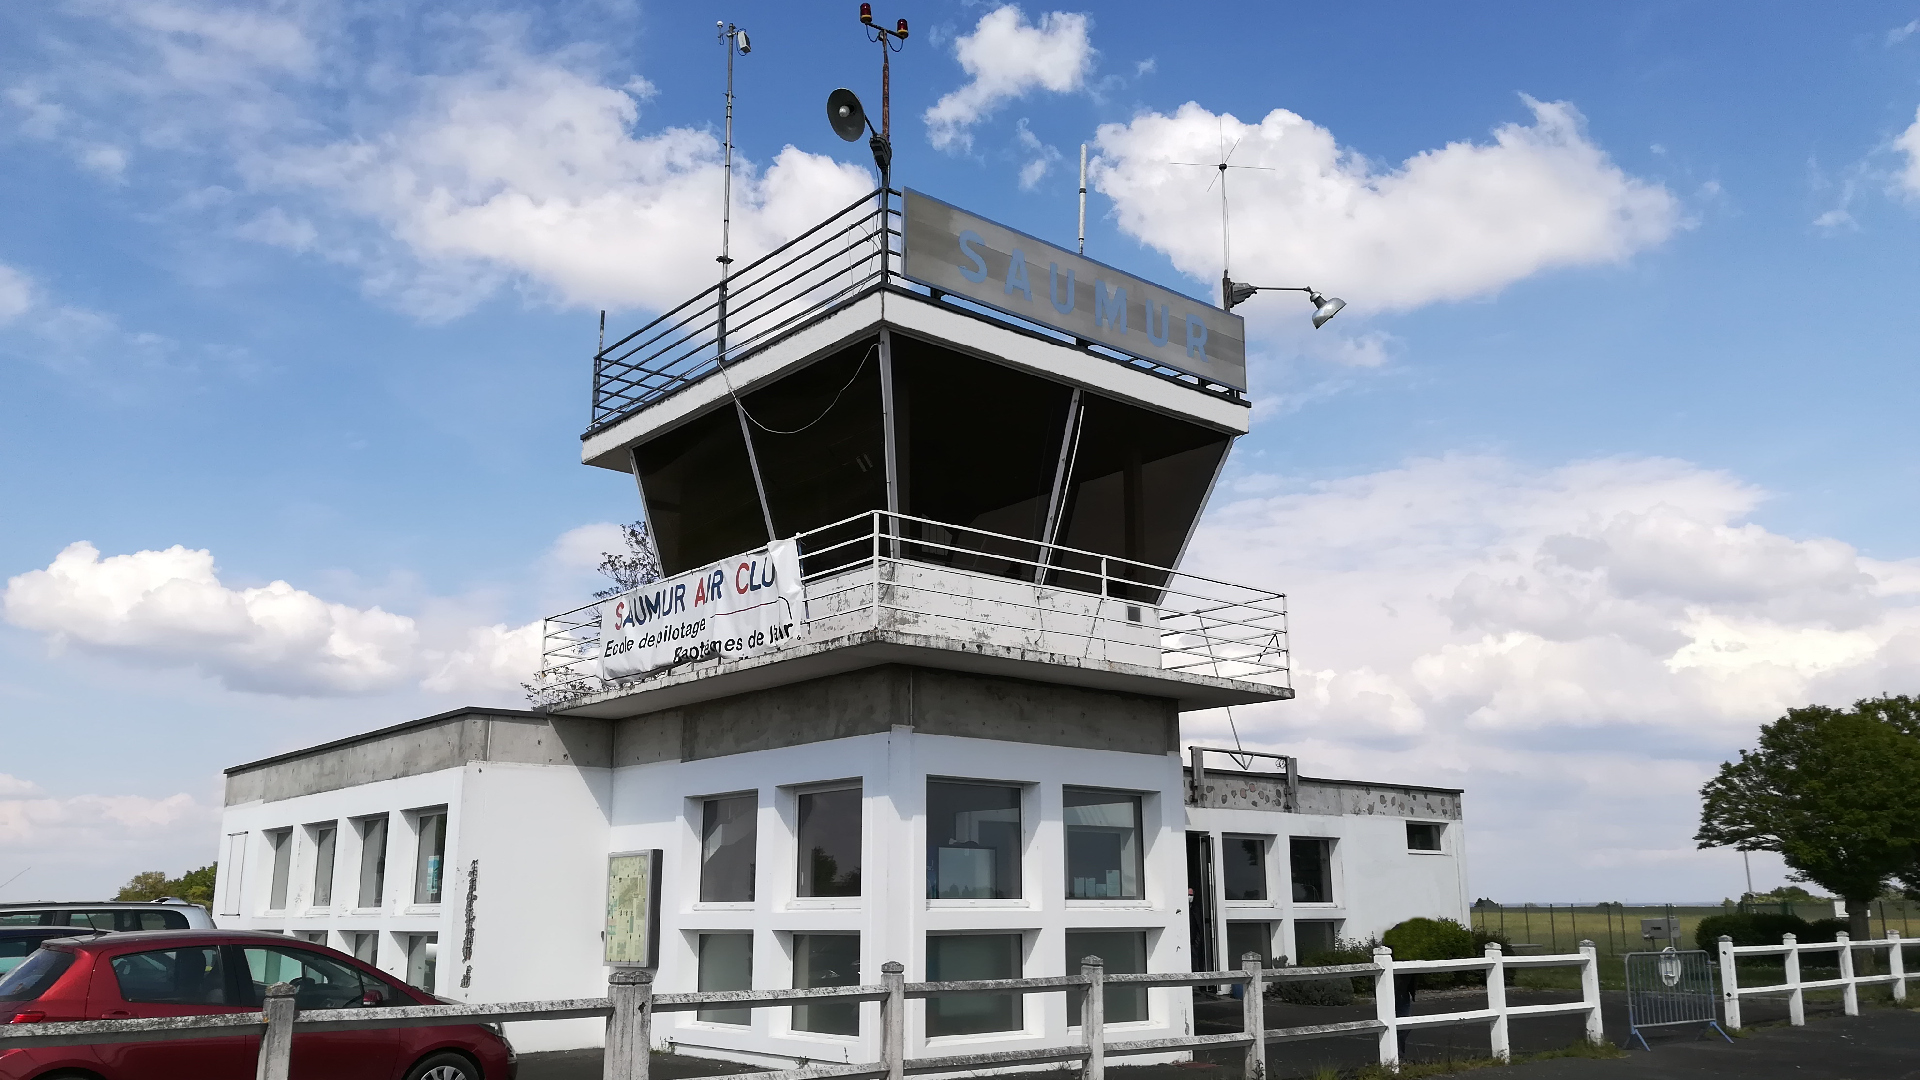 Control Tower and Saumur Air Club